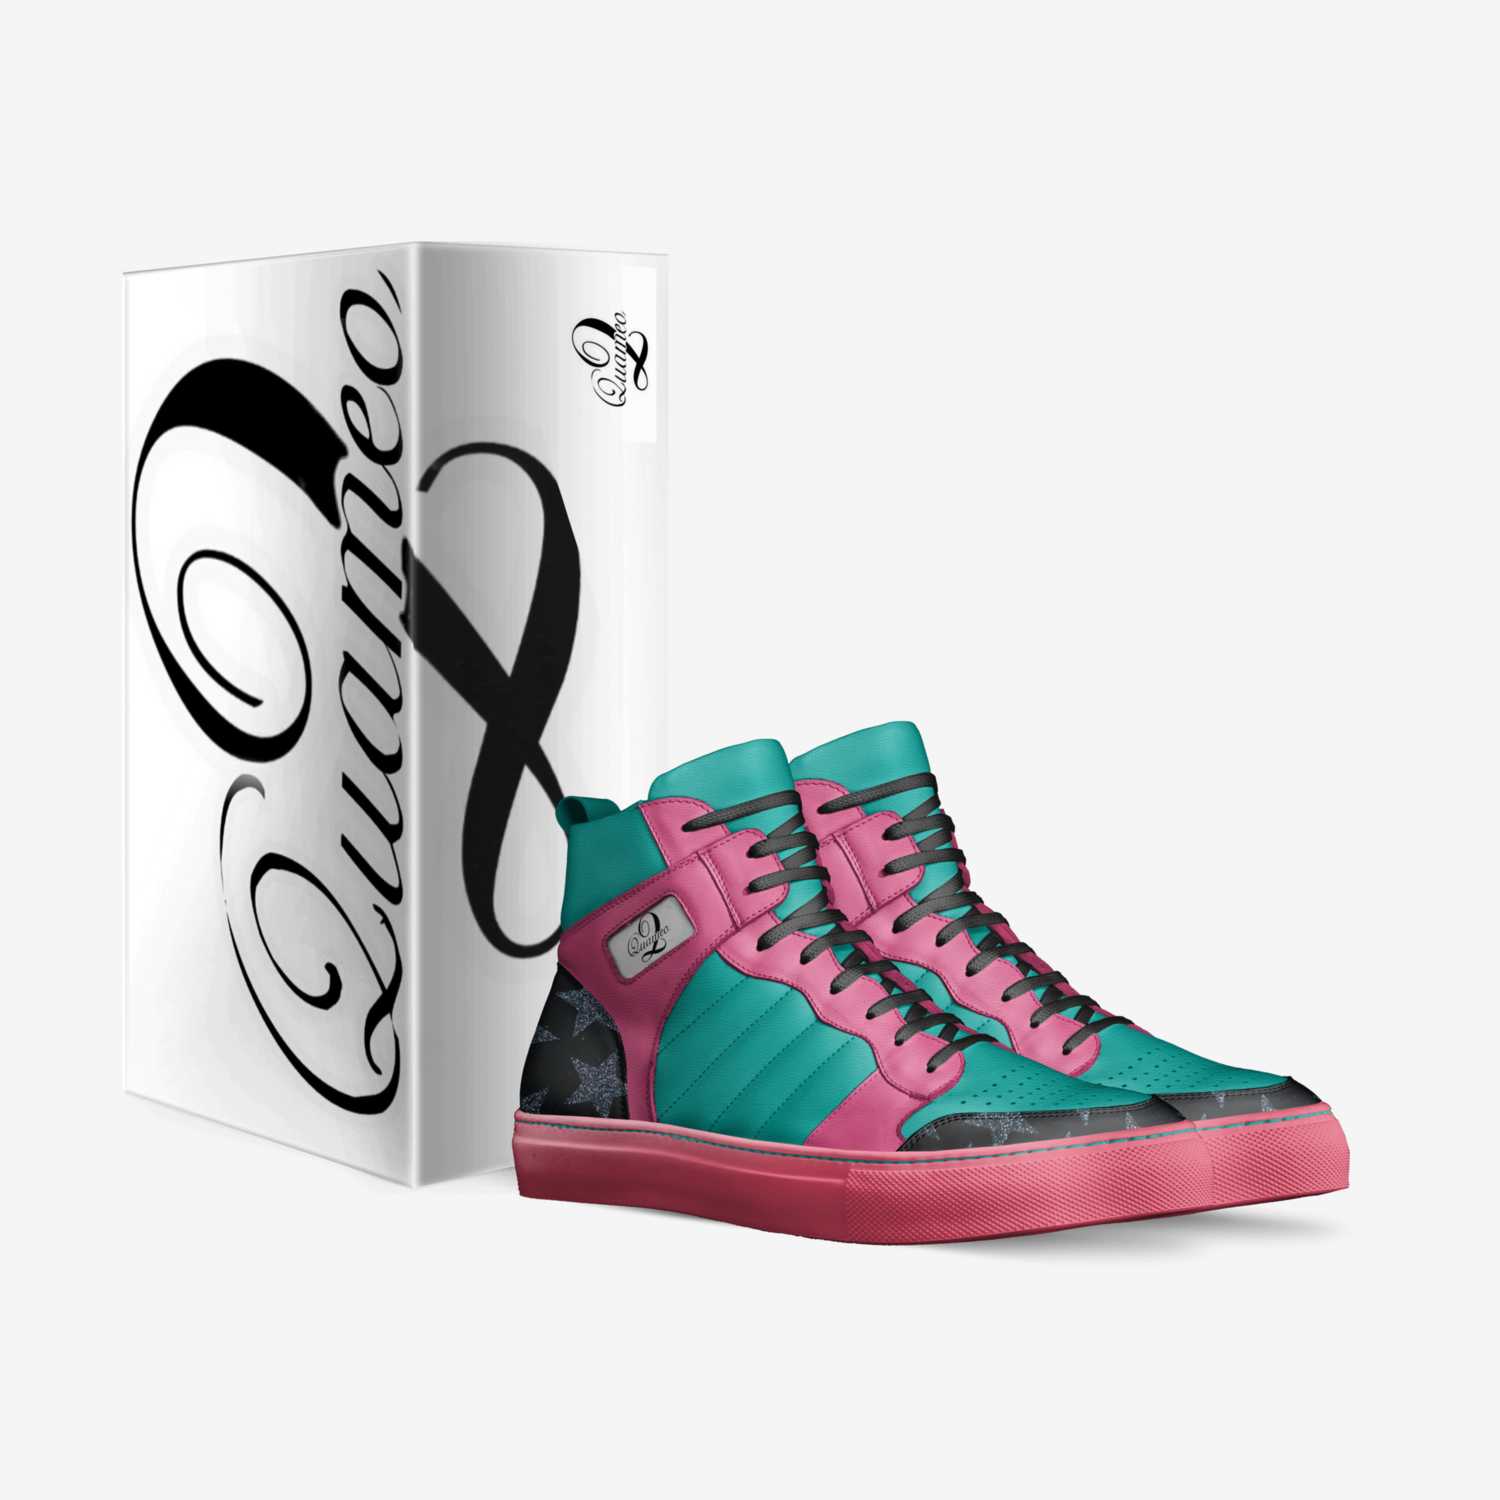 J.Quameo custom made in Italy shoes by Jeffery Robinson | Box view